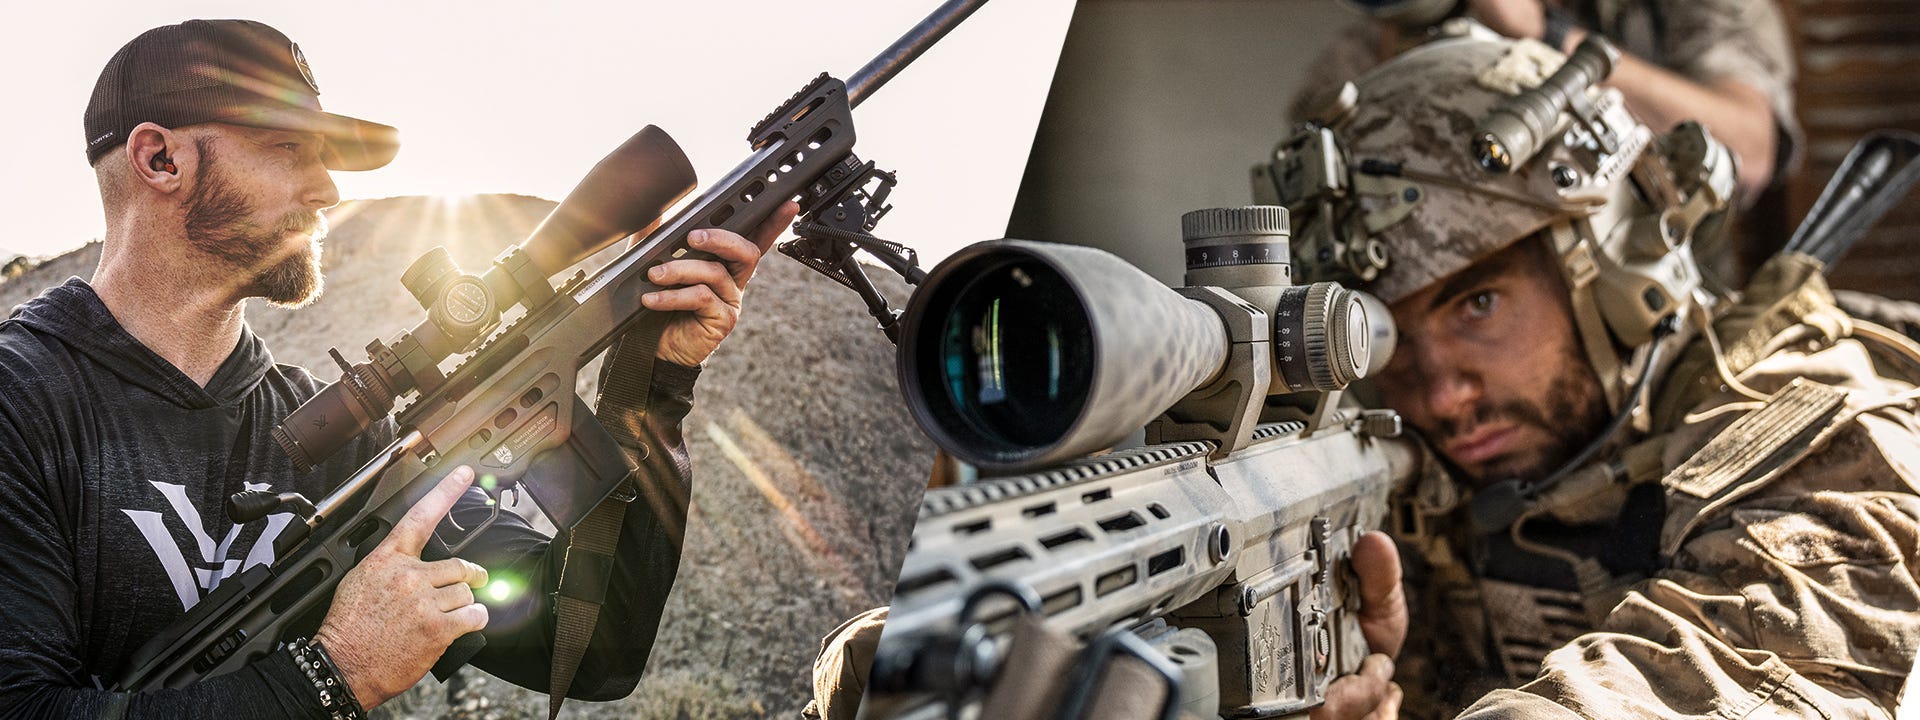 VortexBuilt around the perfect balance of magnification and field of view, the Razor® Gen III 6- 36x56 FFP delivers the resolution and contrast you need for long-range, tactical shooting. To get the absolute most out of the first focal plane reticle, the EBR-7D presents a clean sight picture while still providing ample wind holds and ranging information. Round it out with a rugged build and you have the long-range, tactical solution you’ve been waiting for. 